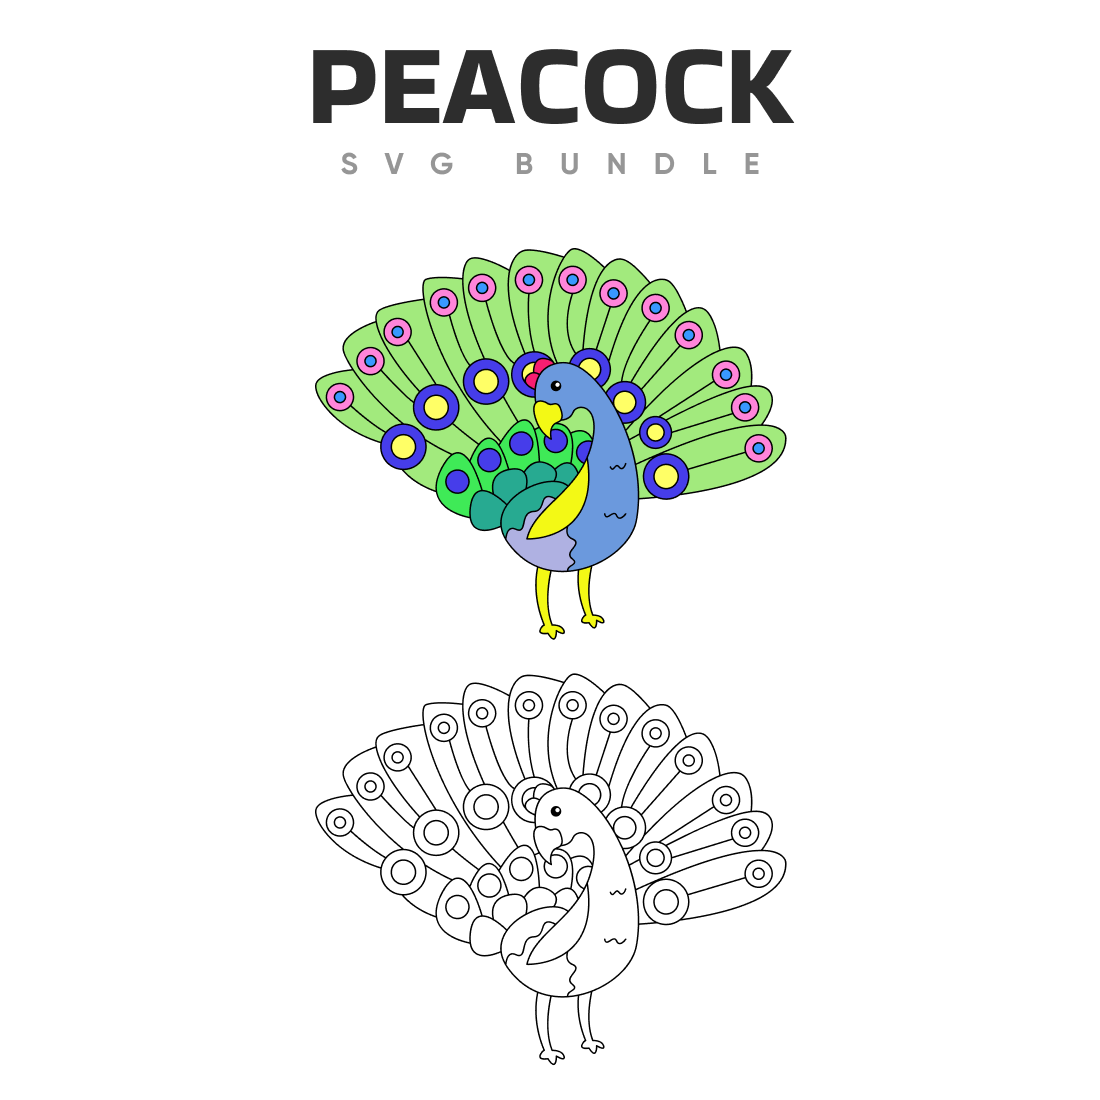 Coloring book with an image of a peacock.